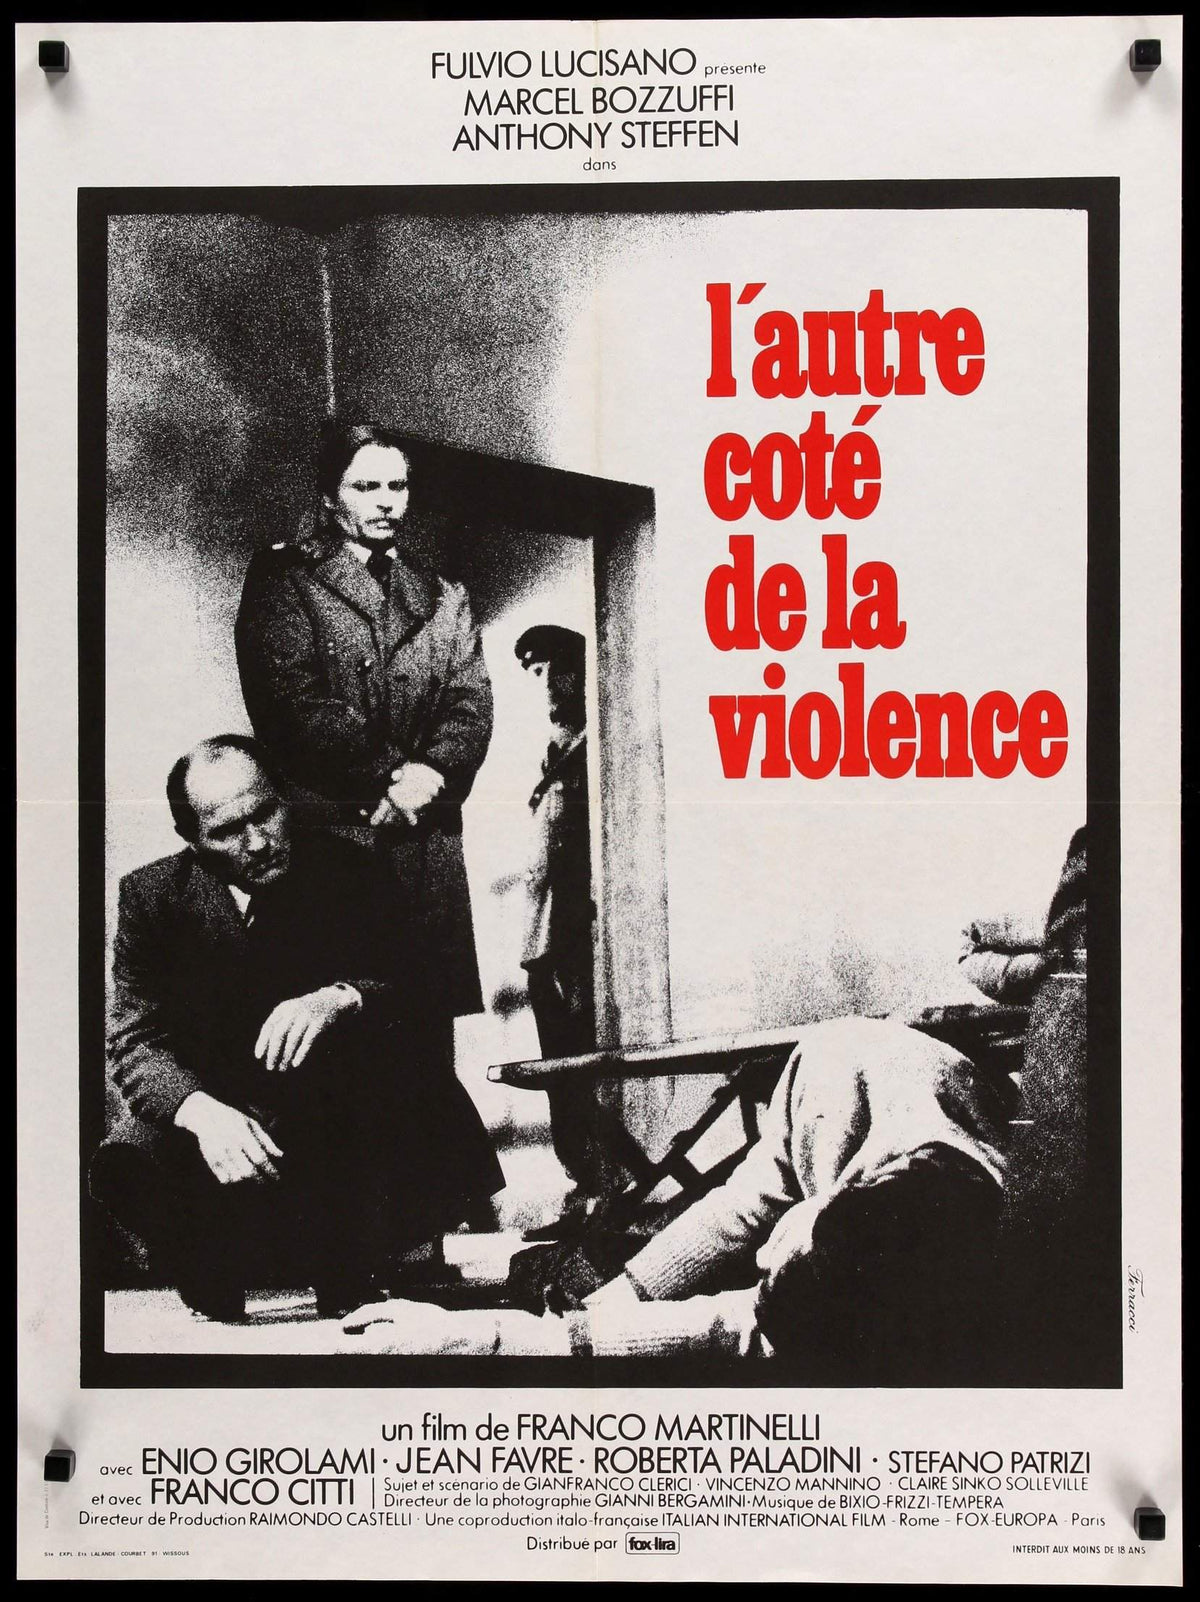 Rome: The Other Side of Violence (1976) original movie poster for sale at Original Film Art